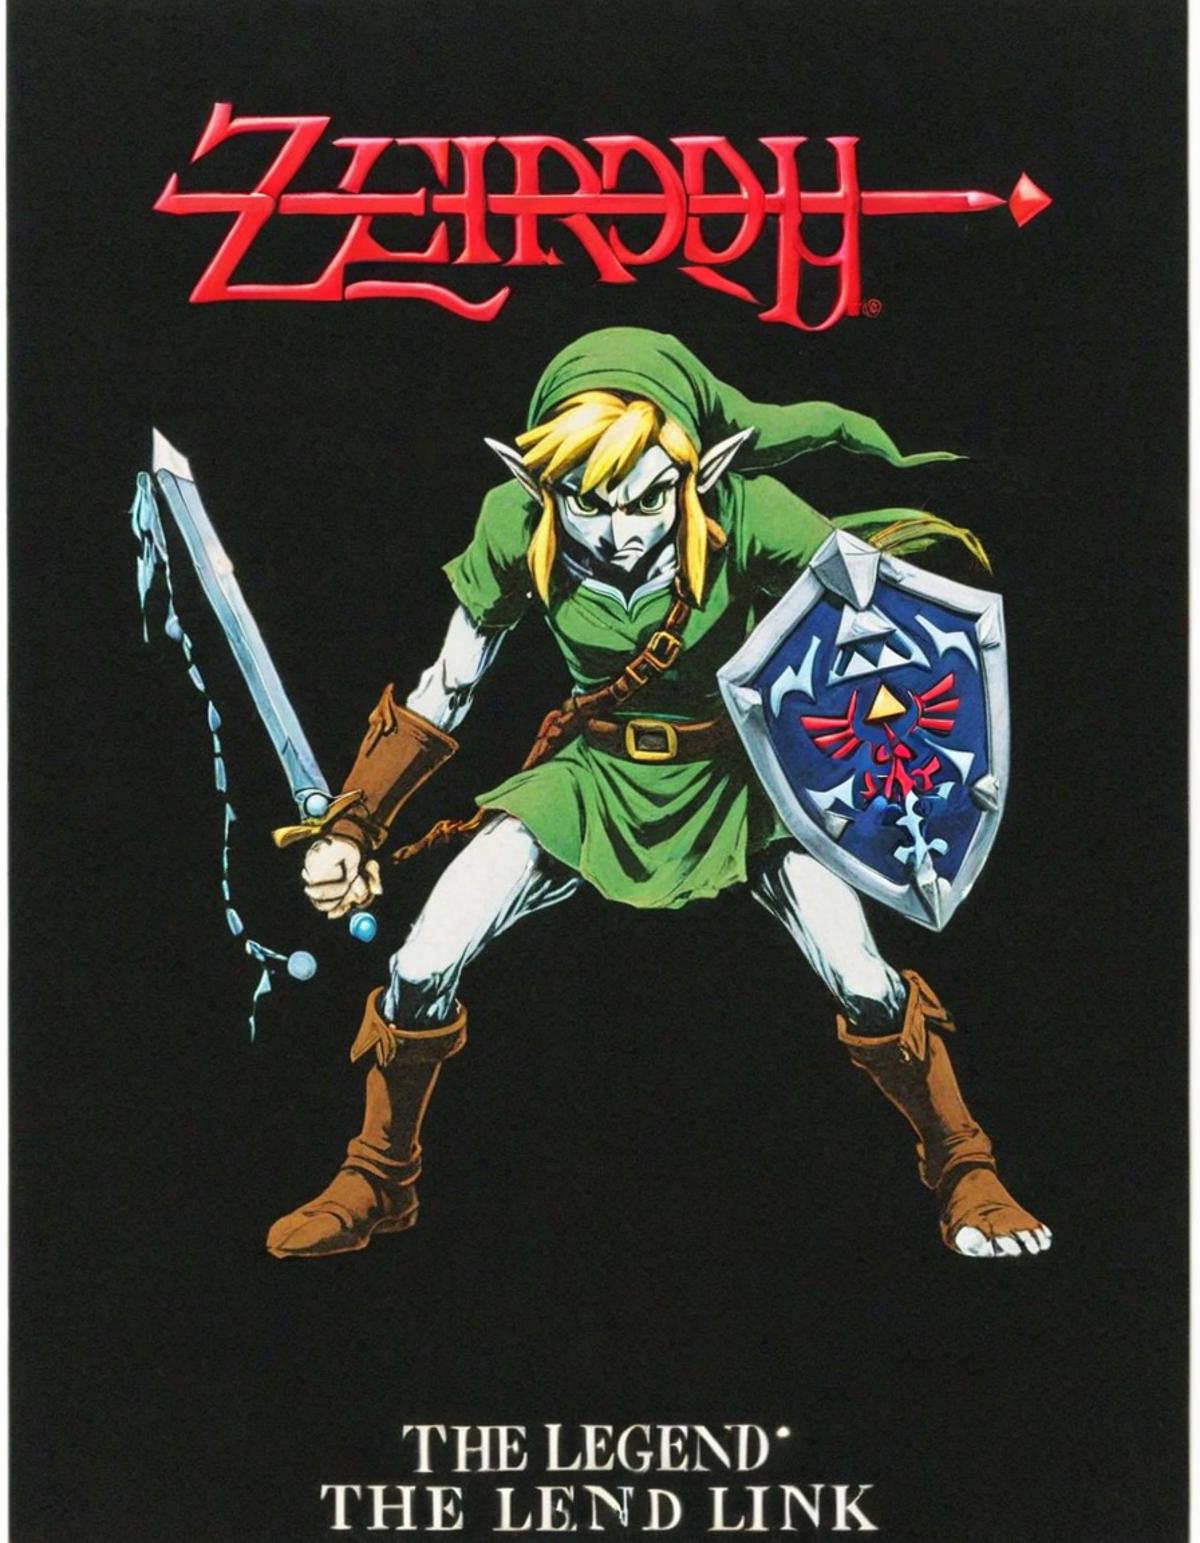 A Legend of Zelda t-shirt with a cartoon picture of Link holding a sword.